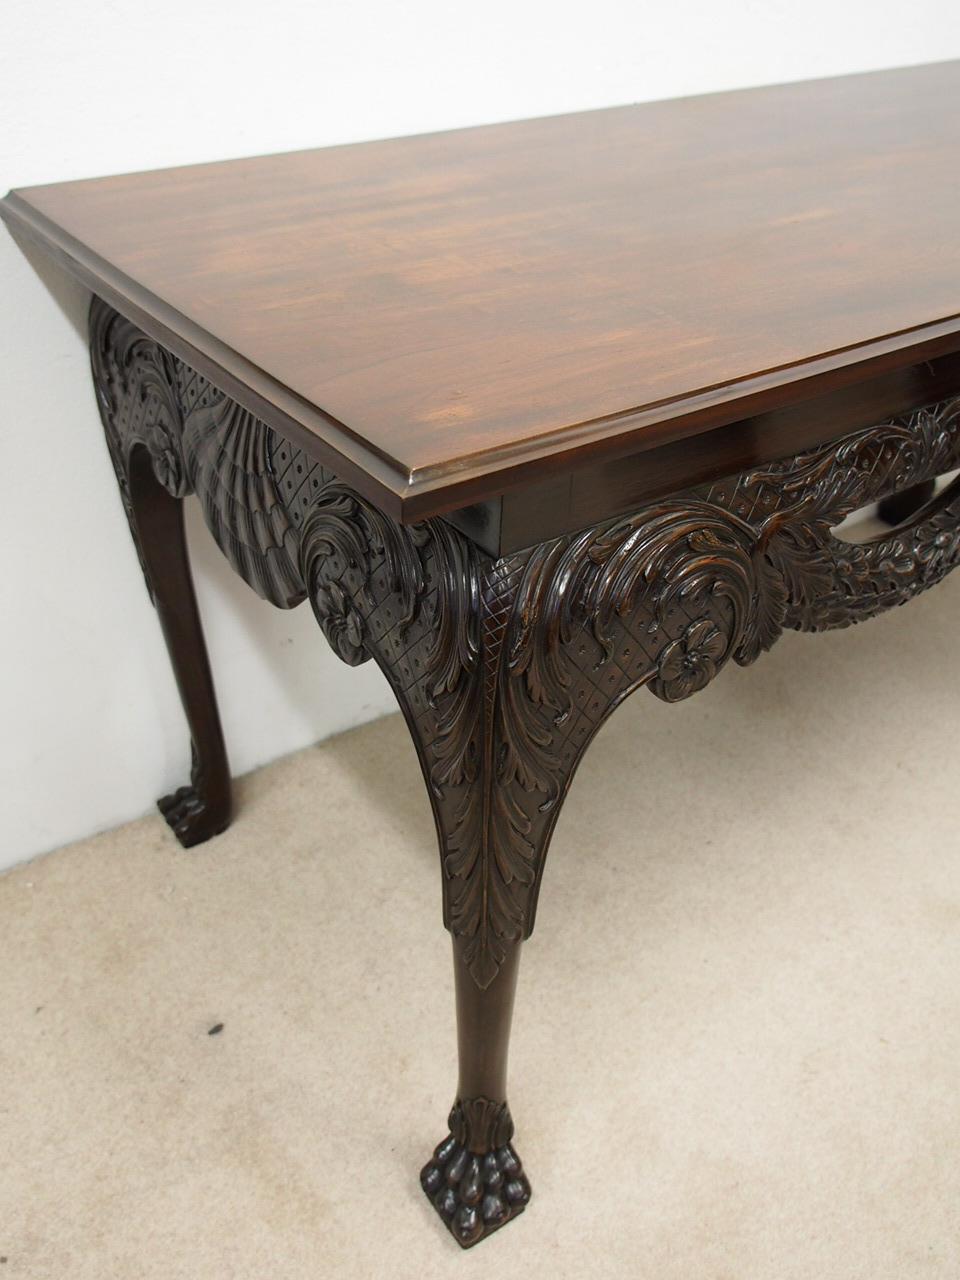 Mid 1800s, Irish George II Chippendale style carved mahogany hall table. The rectangular mahogany top with a fluted molding (originally would have had a marble top) is over an impressive carved frieze on both sides and front. It contains a central,